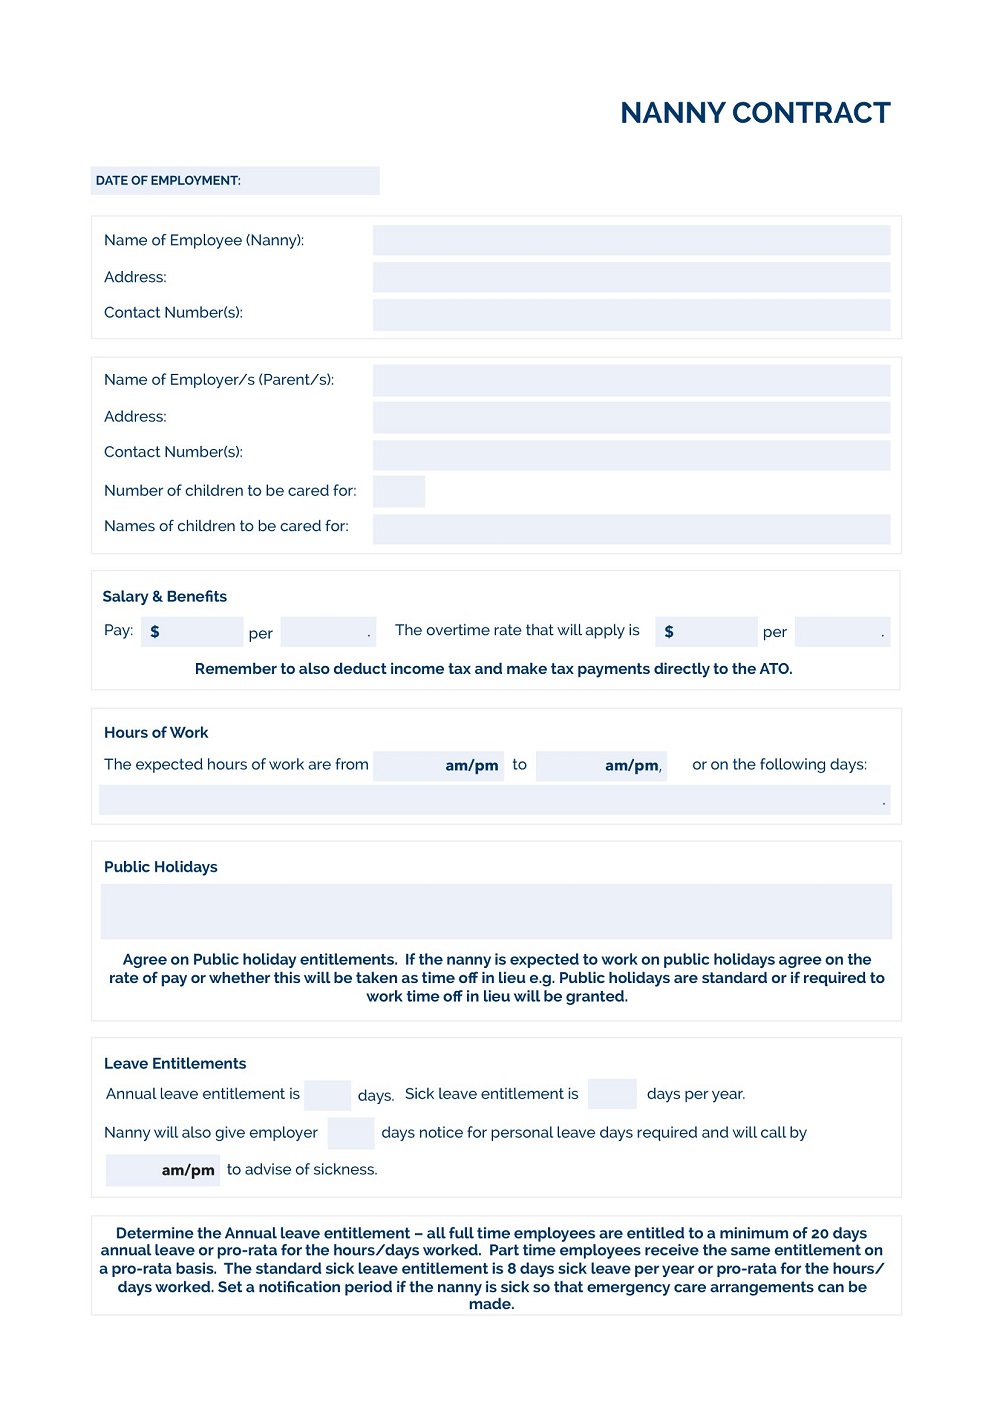 Childcare Nanny Contract Template